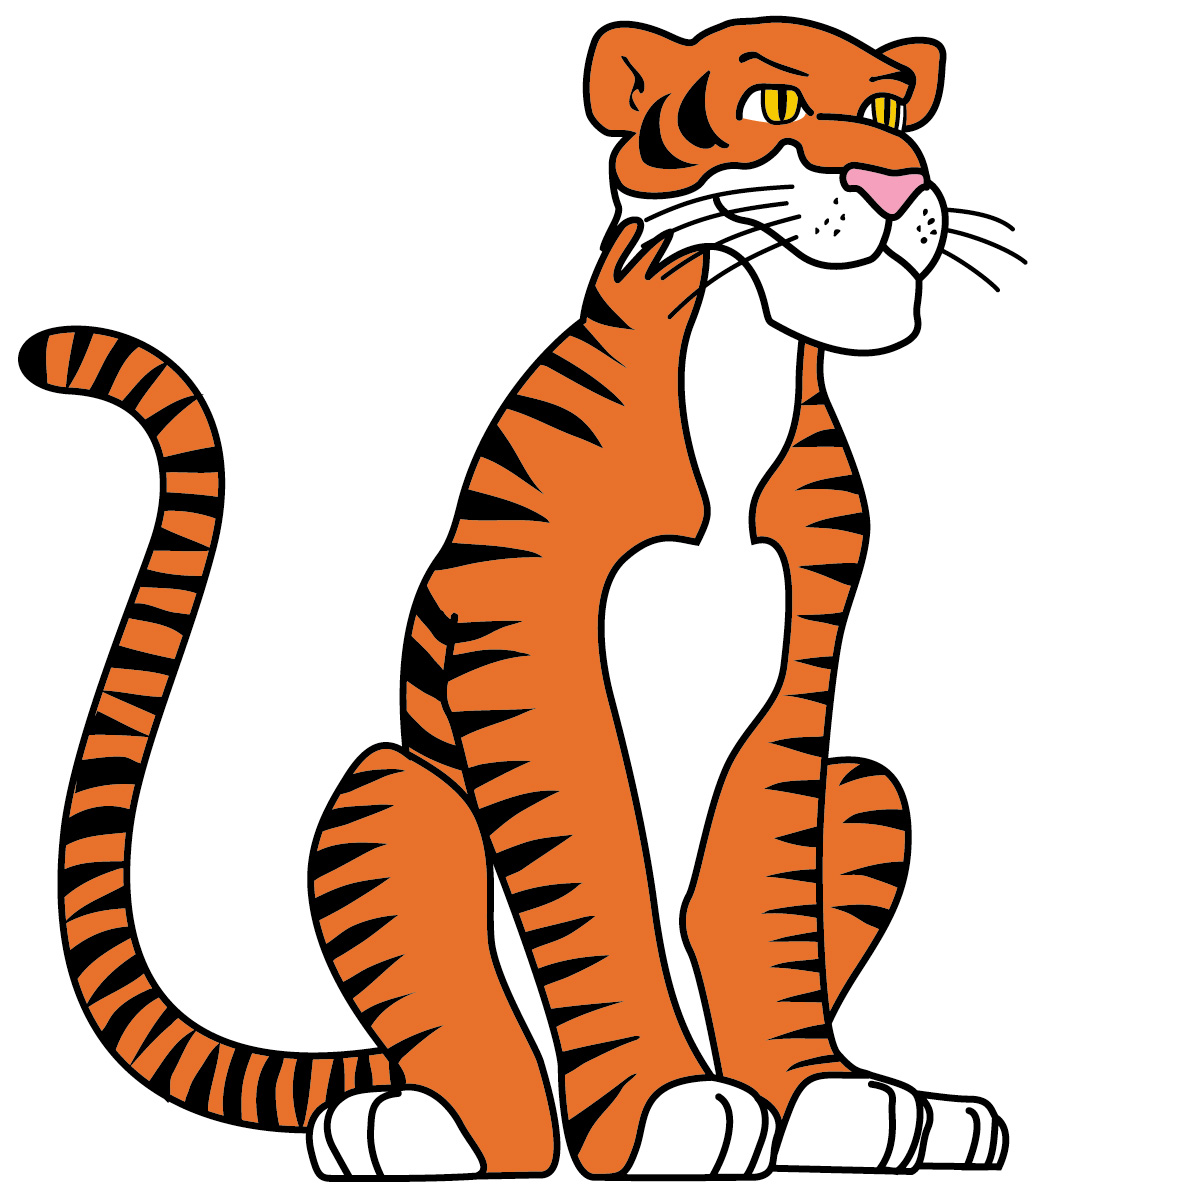 Cute baby tiger clipart free images